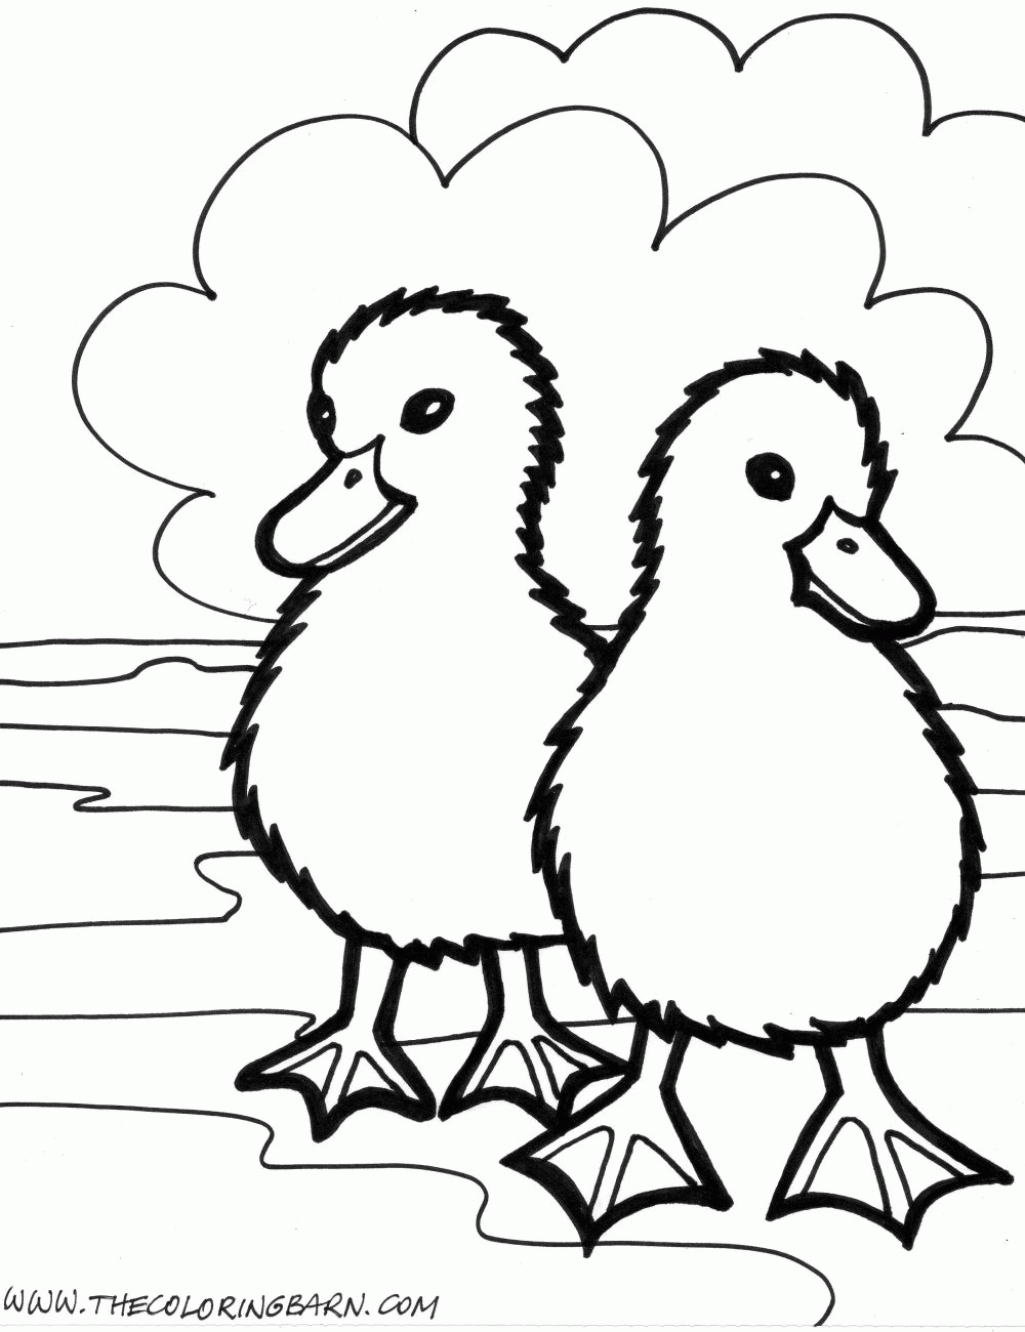 20-printable-realistic-farm-animal-coloring-pages-png-colorist